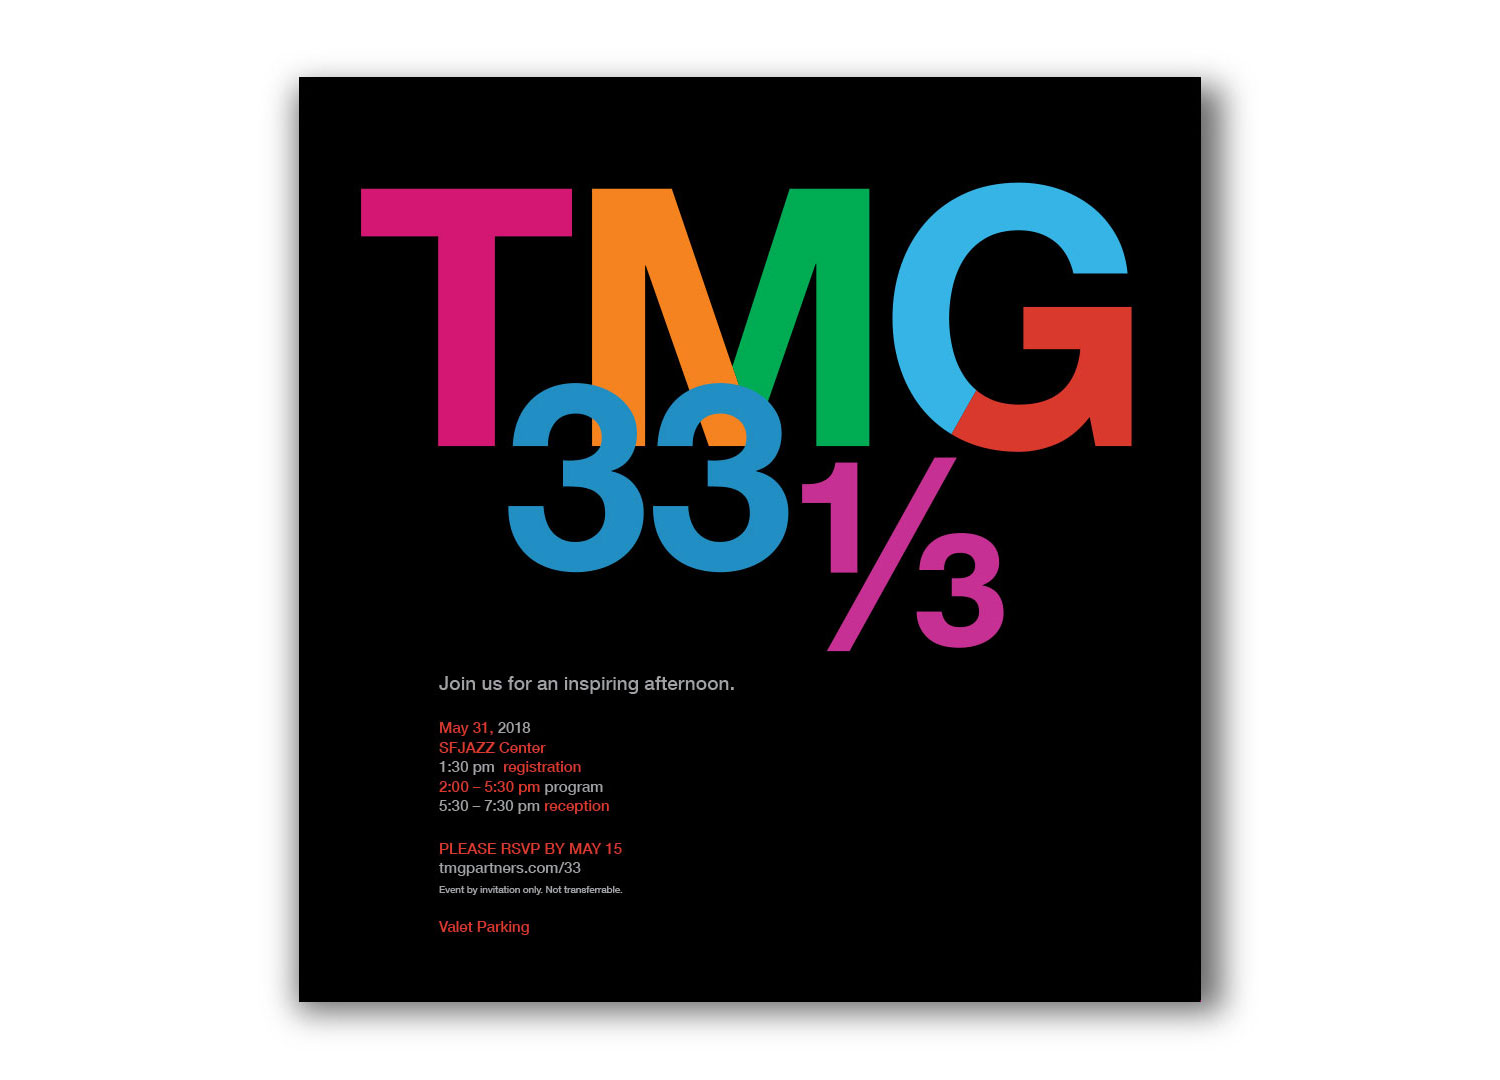 Black pocket panel with large TMG 33⅓ logo and event date, time and location.